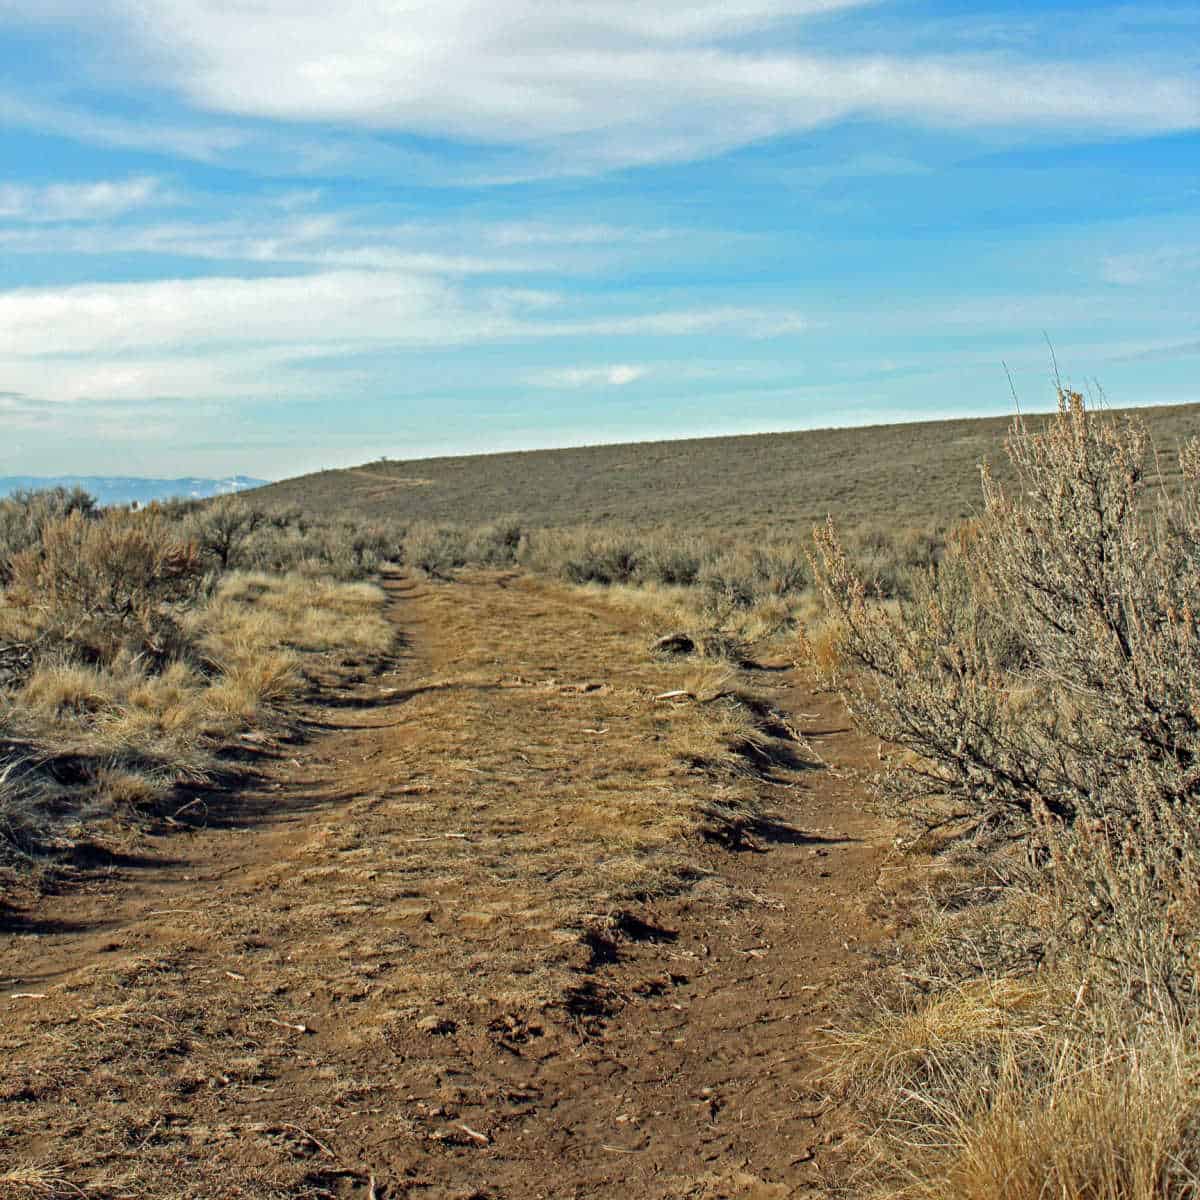 wagon ruts still visible today from the Oregon Trail